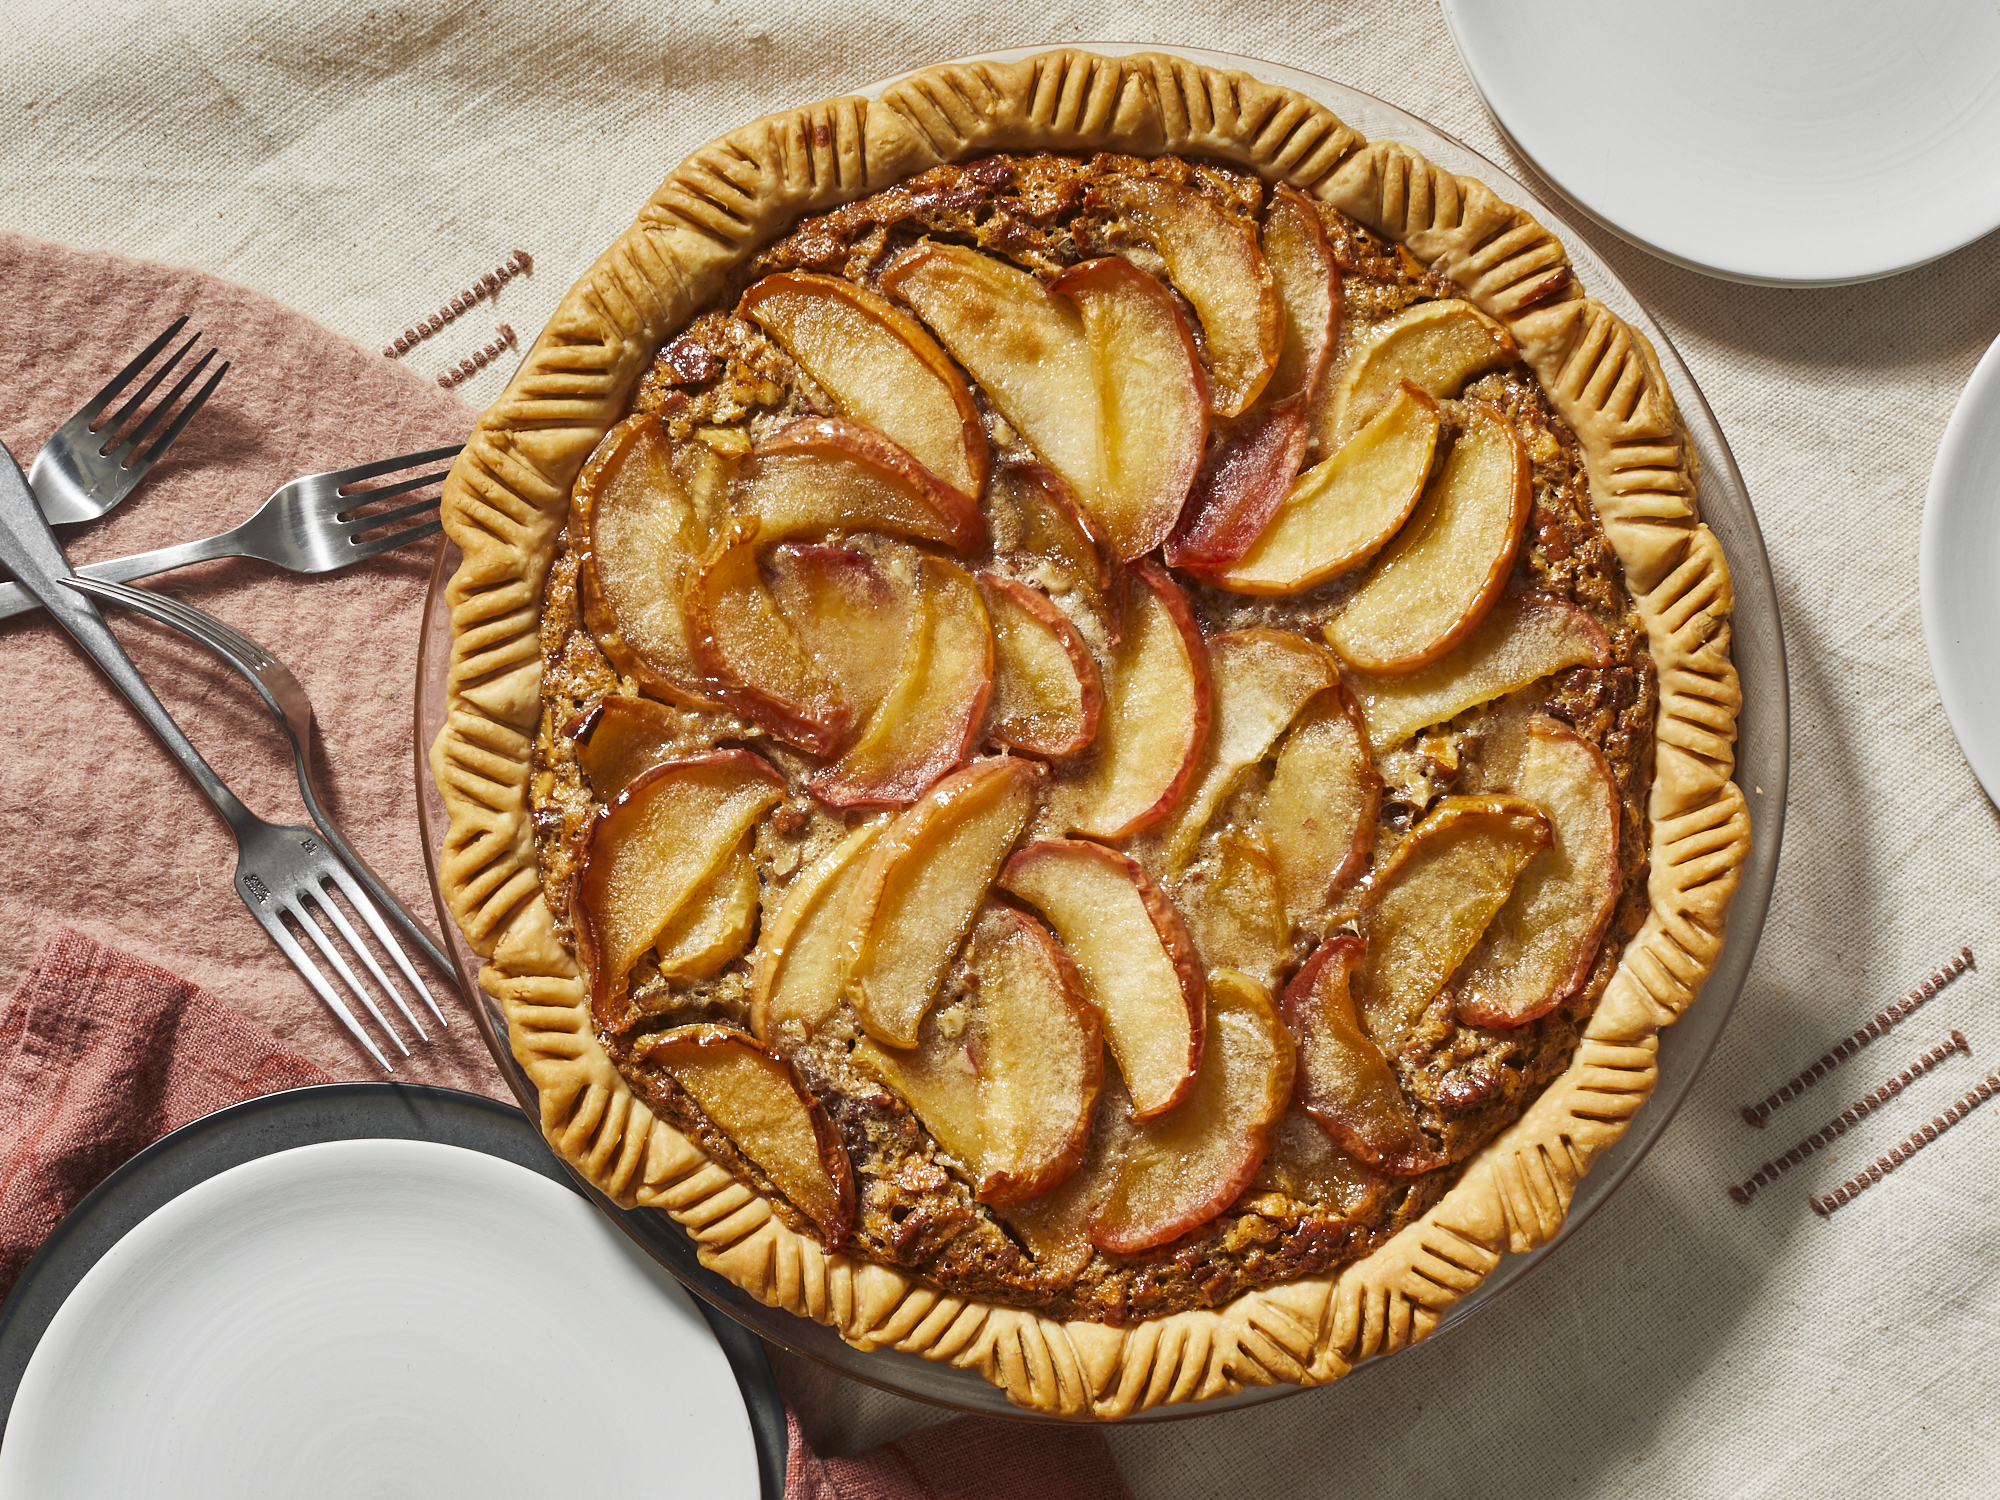 50+ Golden Delicious Recipes with Apples